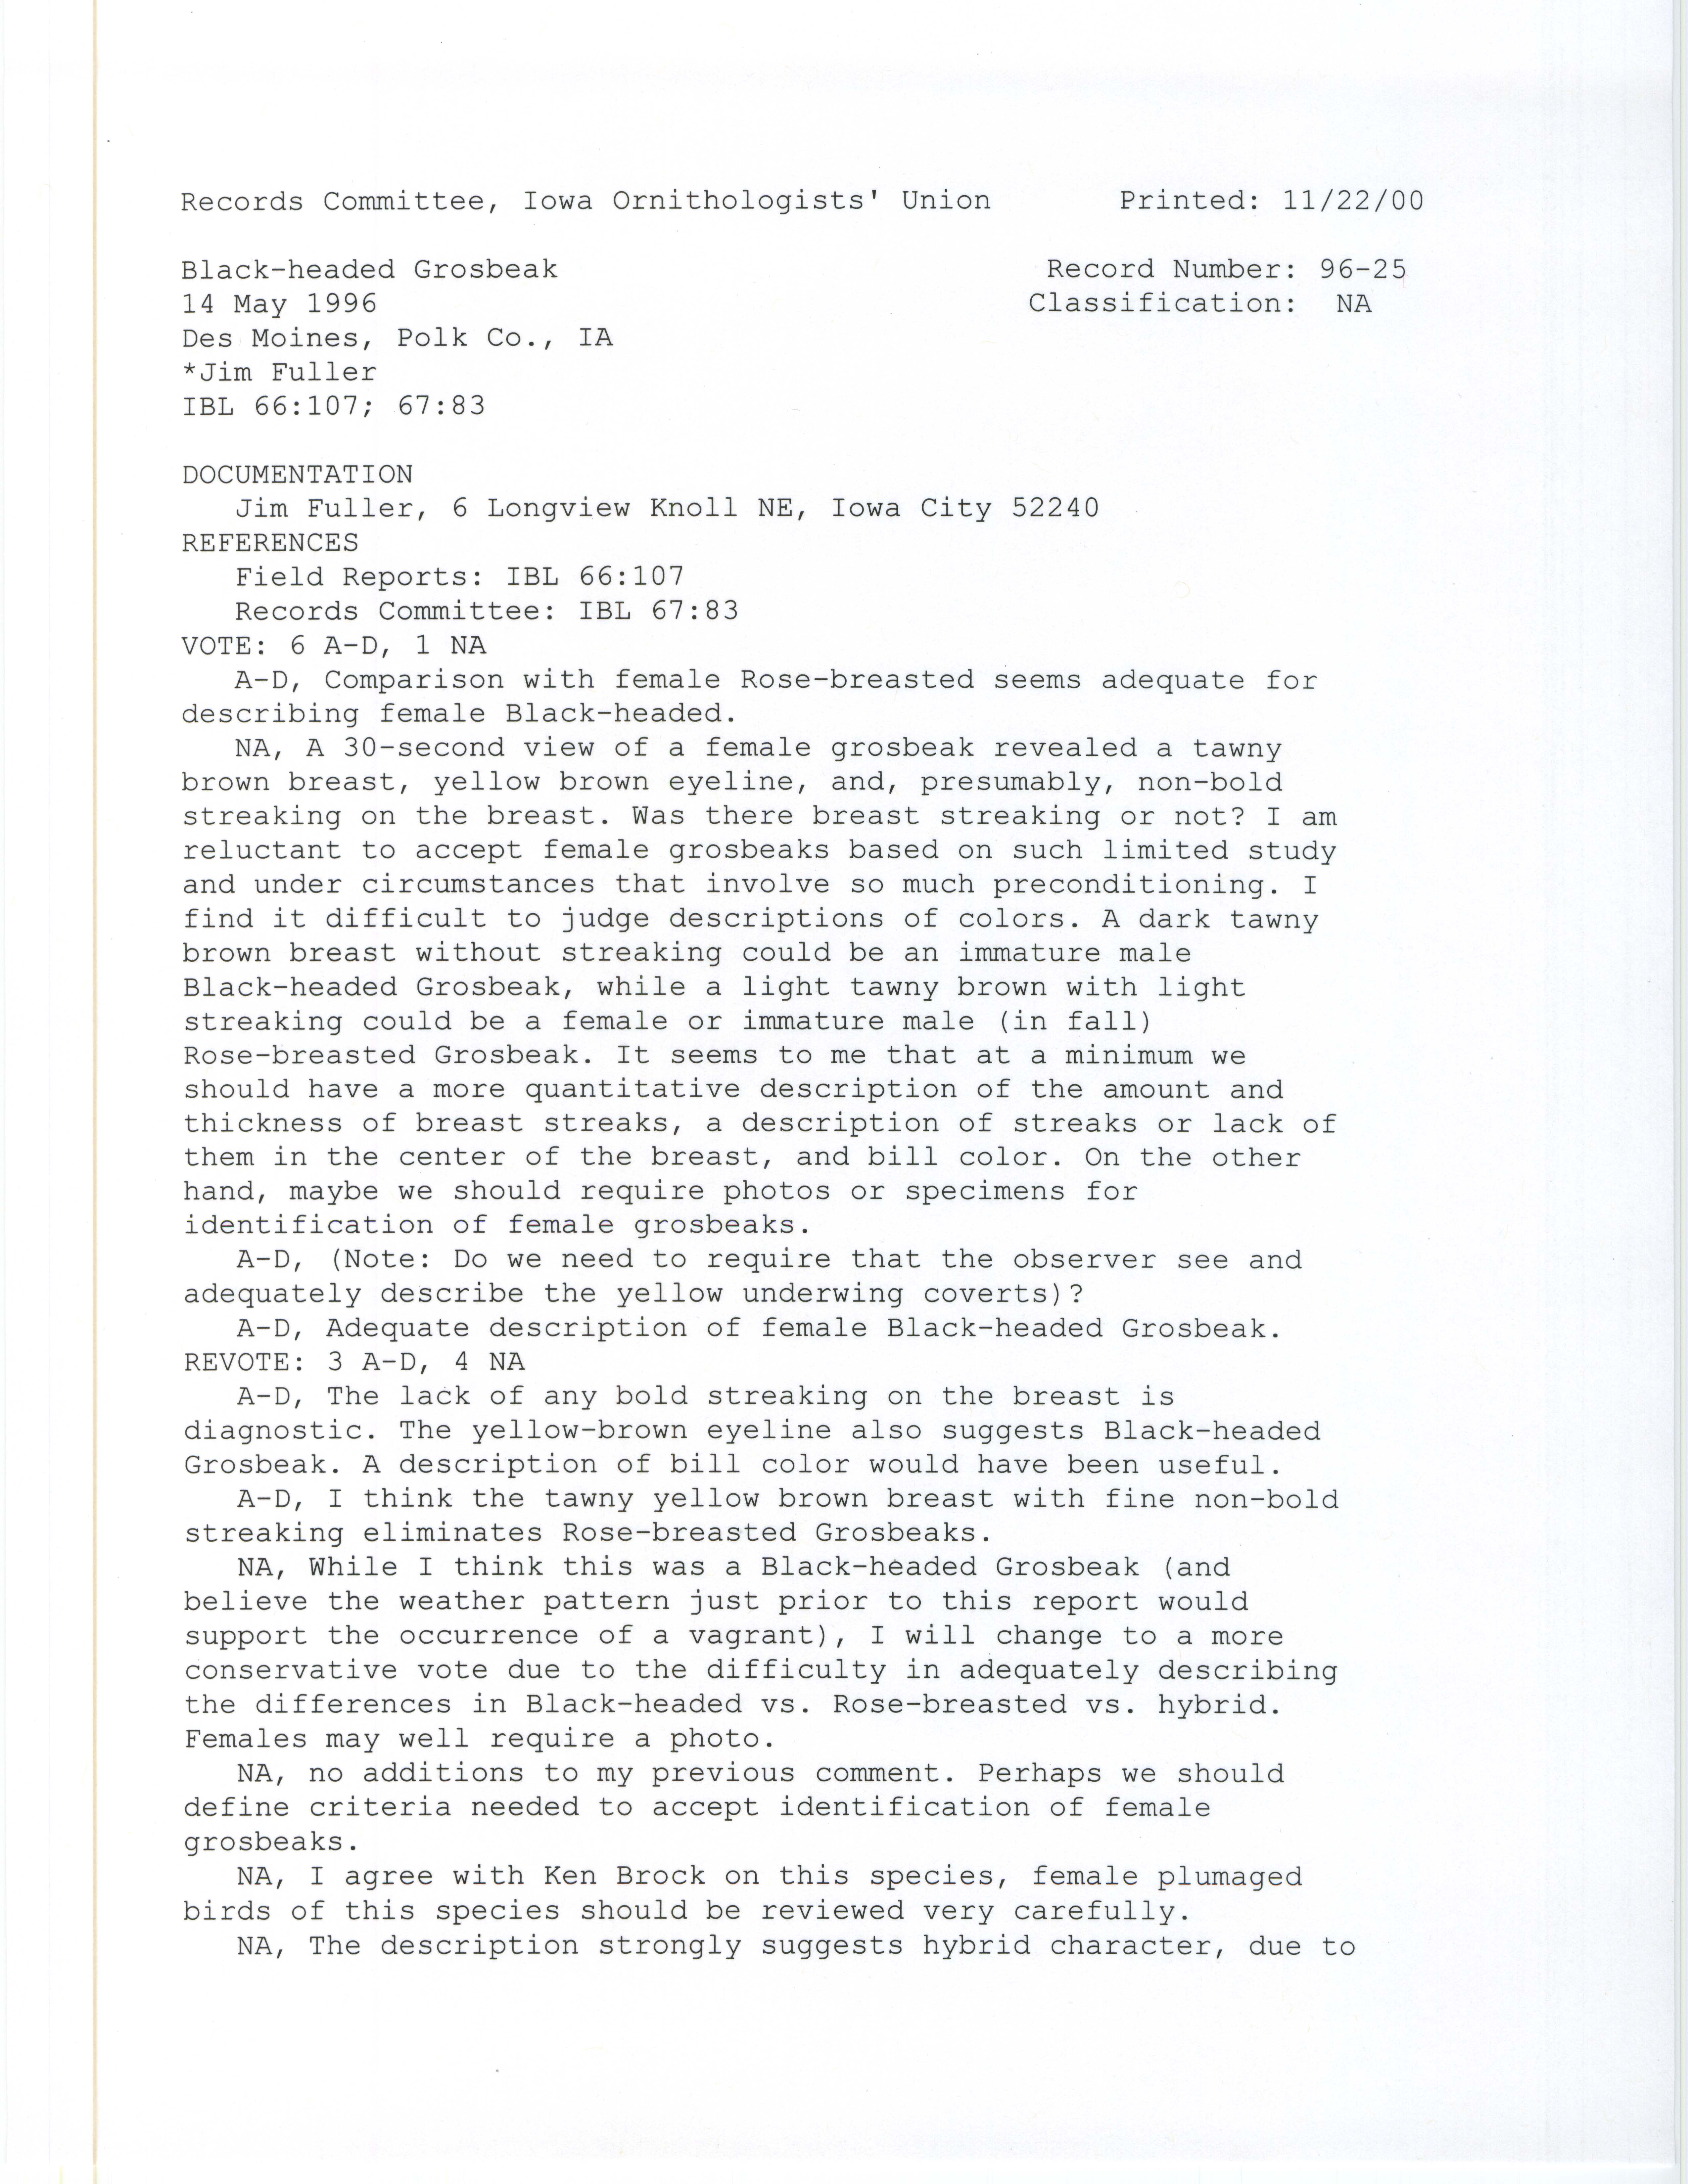 Records Committee review for rare bird sighting for Black-headed Grosbeak at Des Moines, 1996